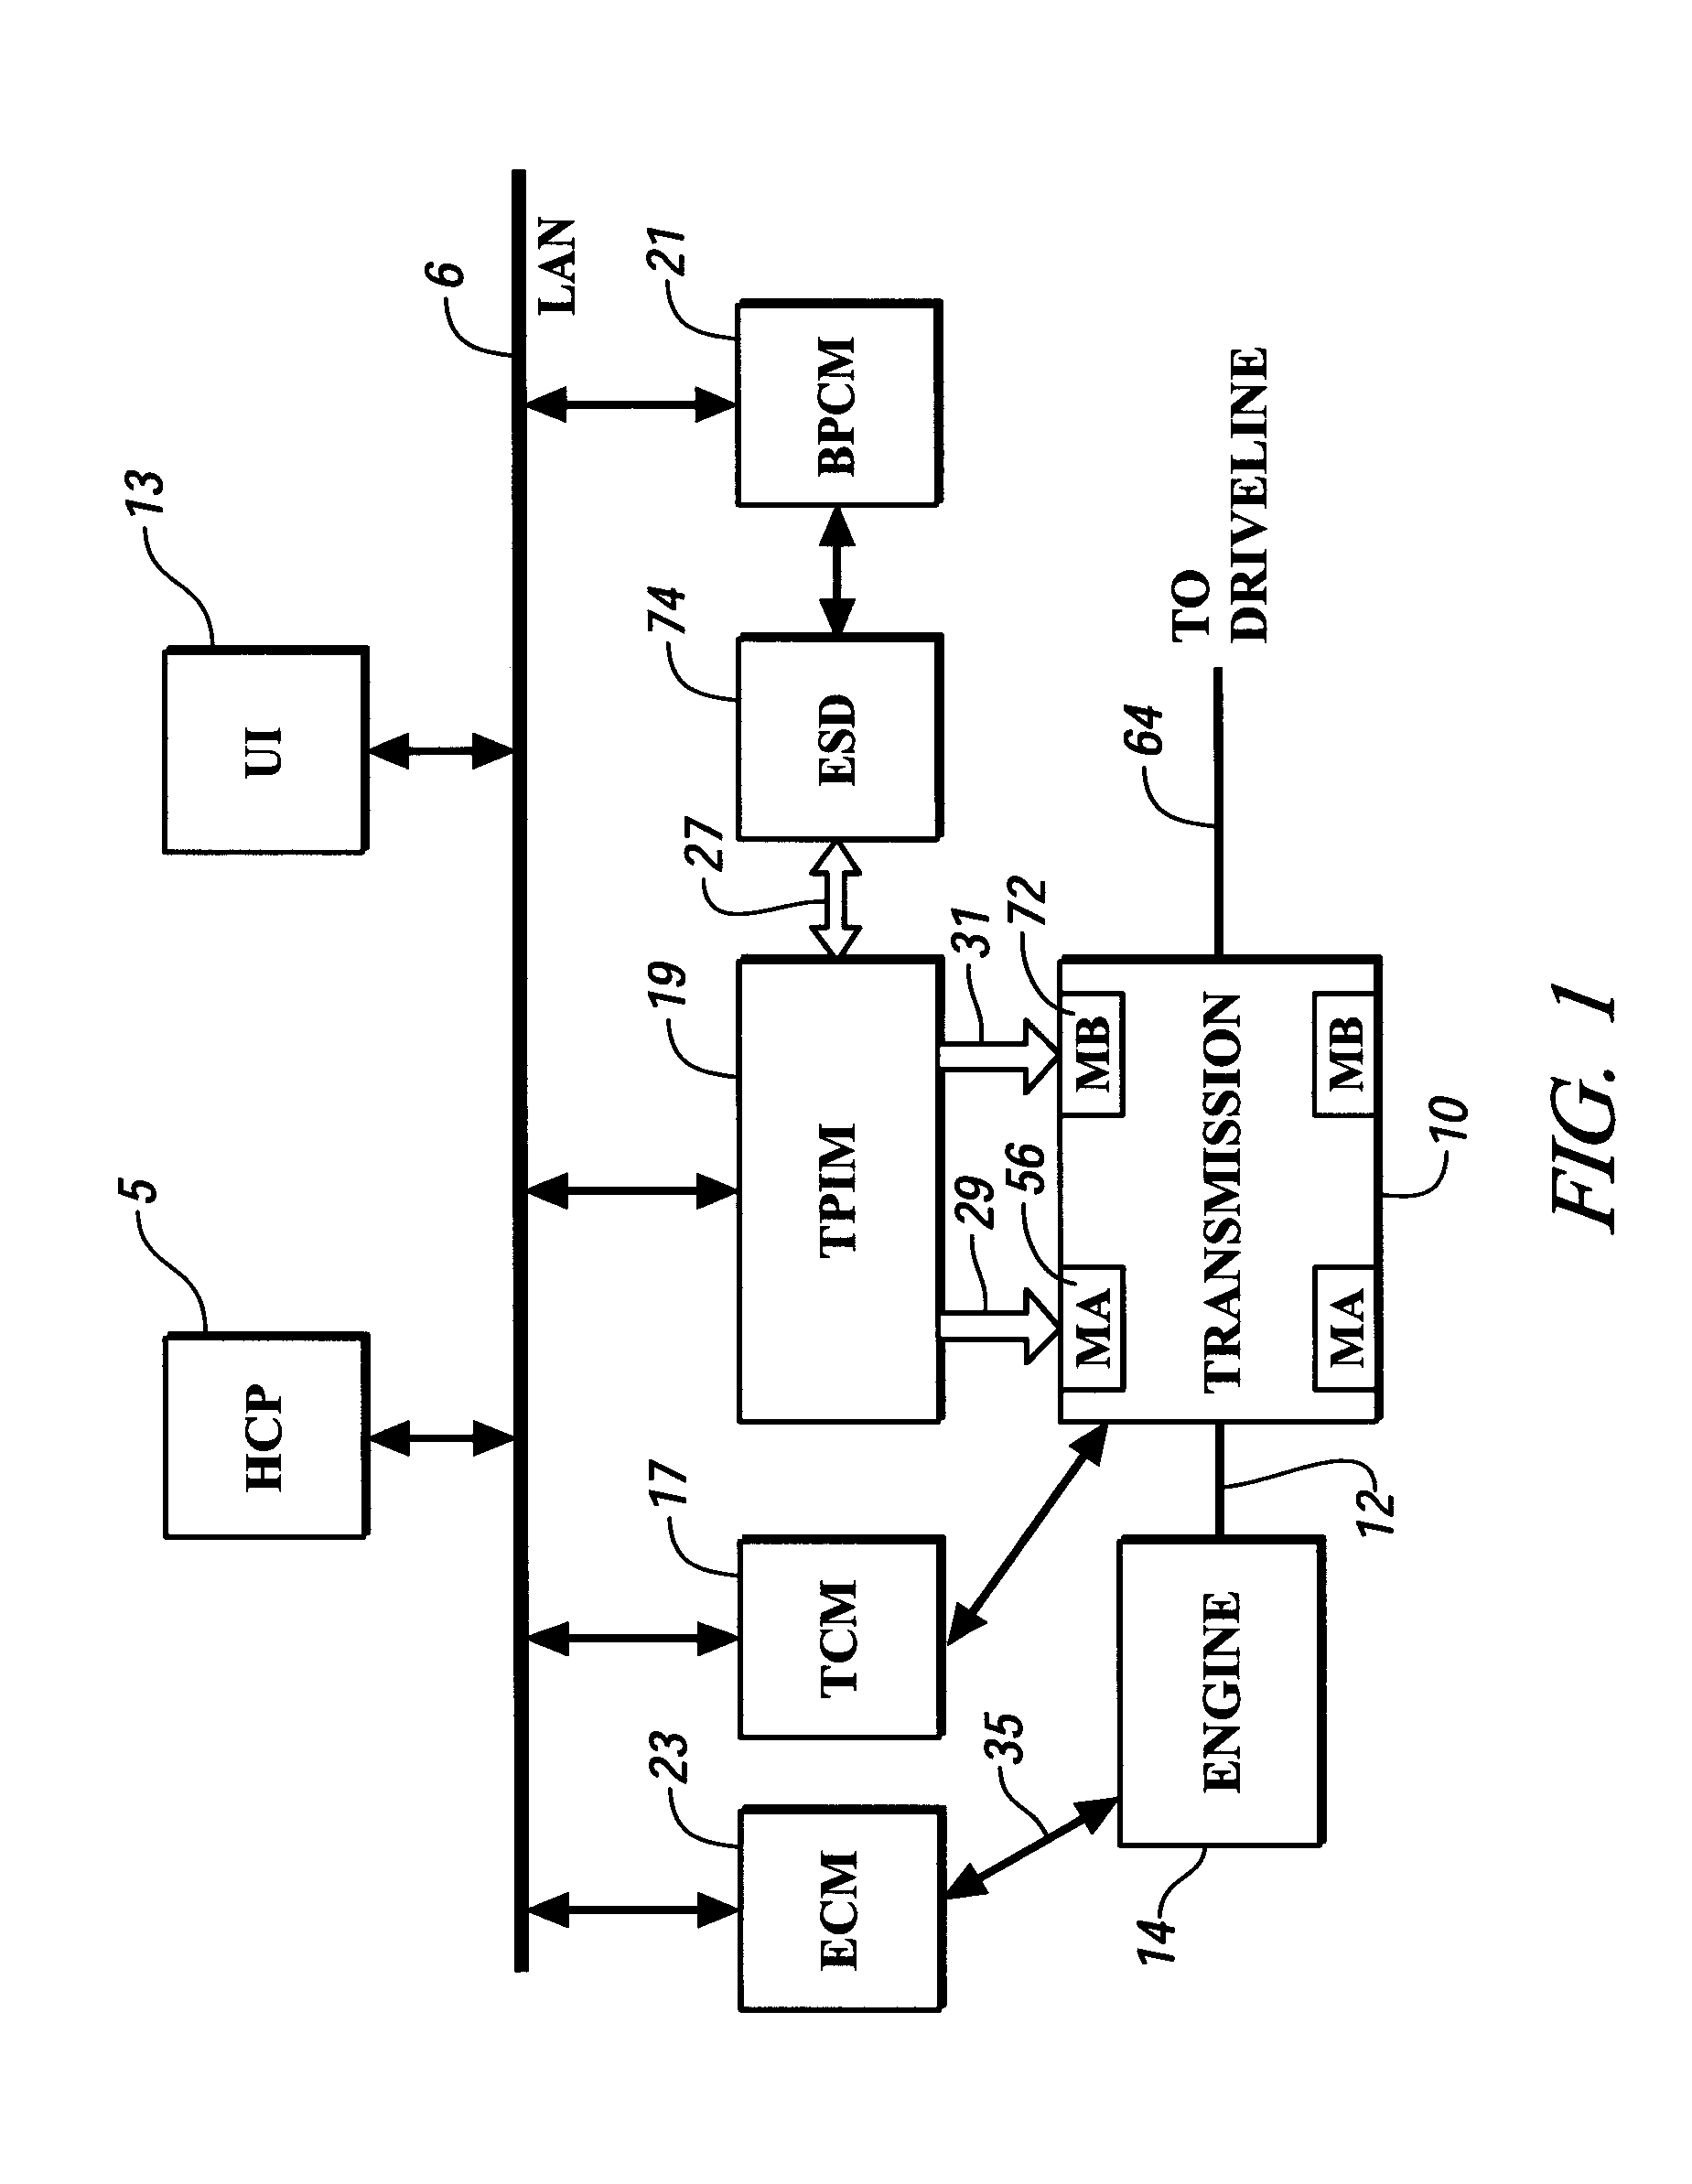 Method and apparatus for management of an electric energy storage device to achieve a target life objective